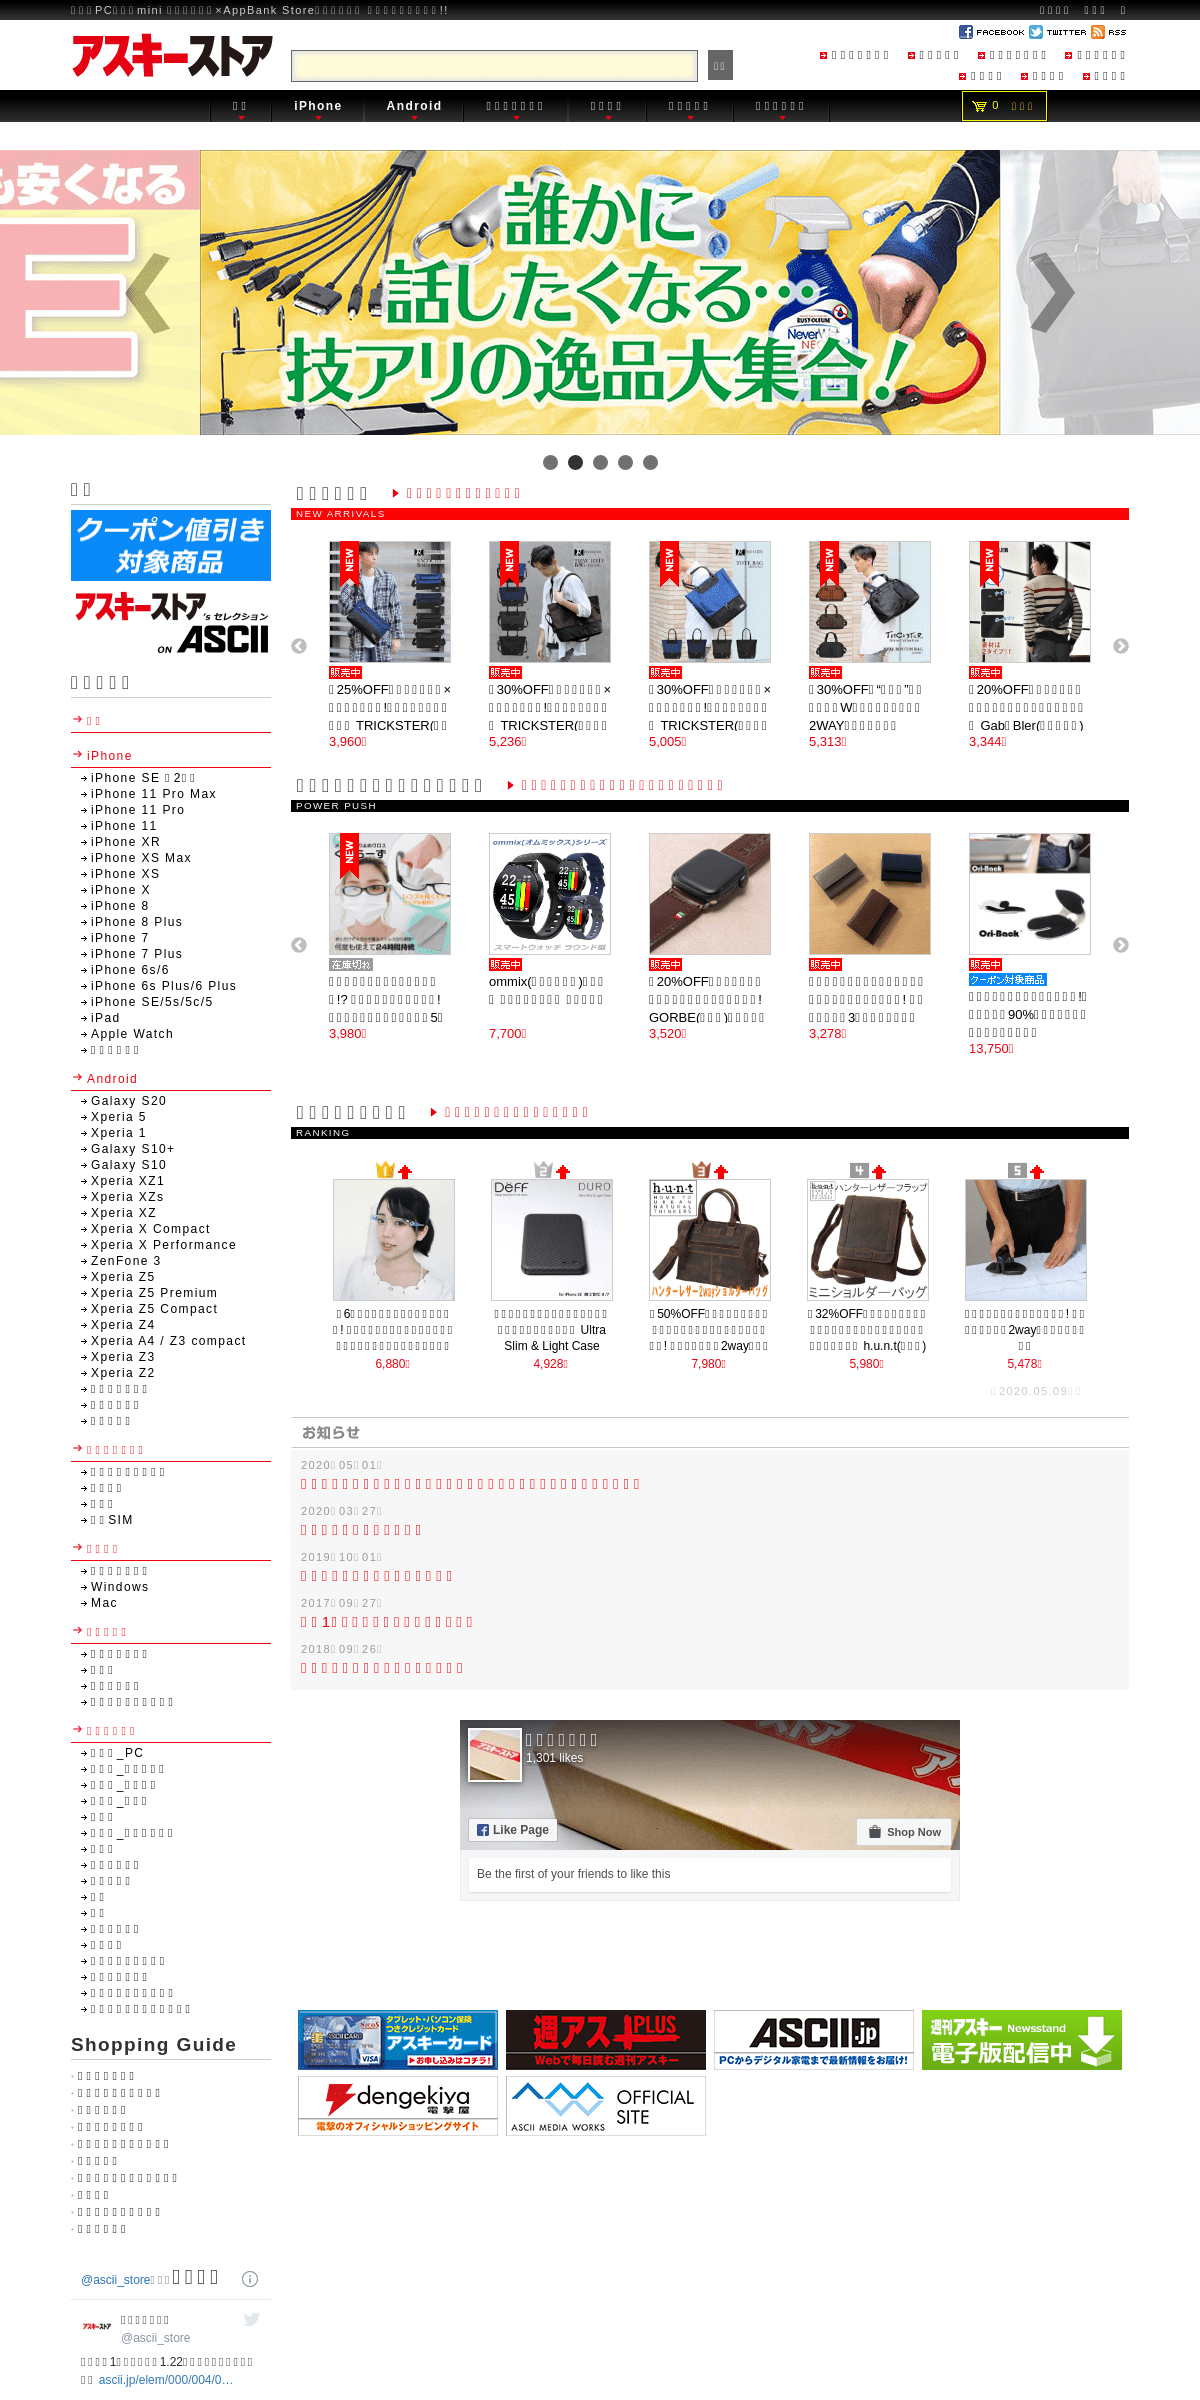 A complete backup of ascii-store.jp